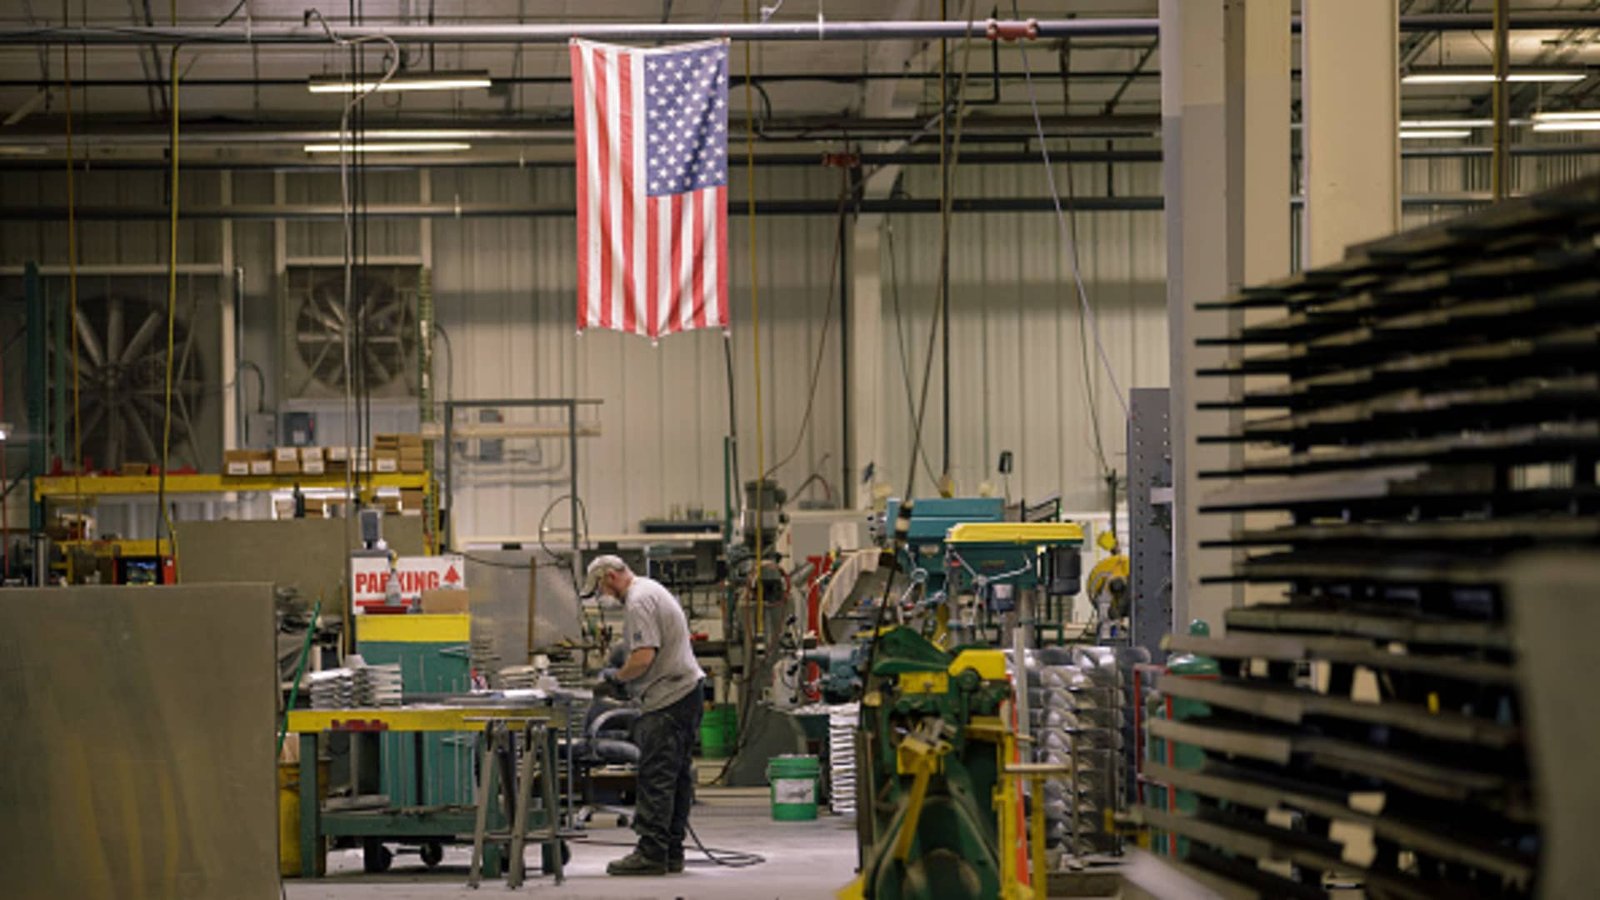 ‘Early innings’ of a U.S. manufacturing increase: Tema ETFs CEO